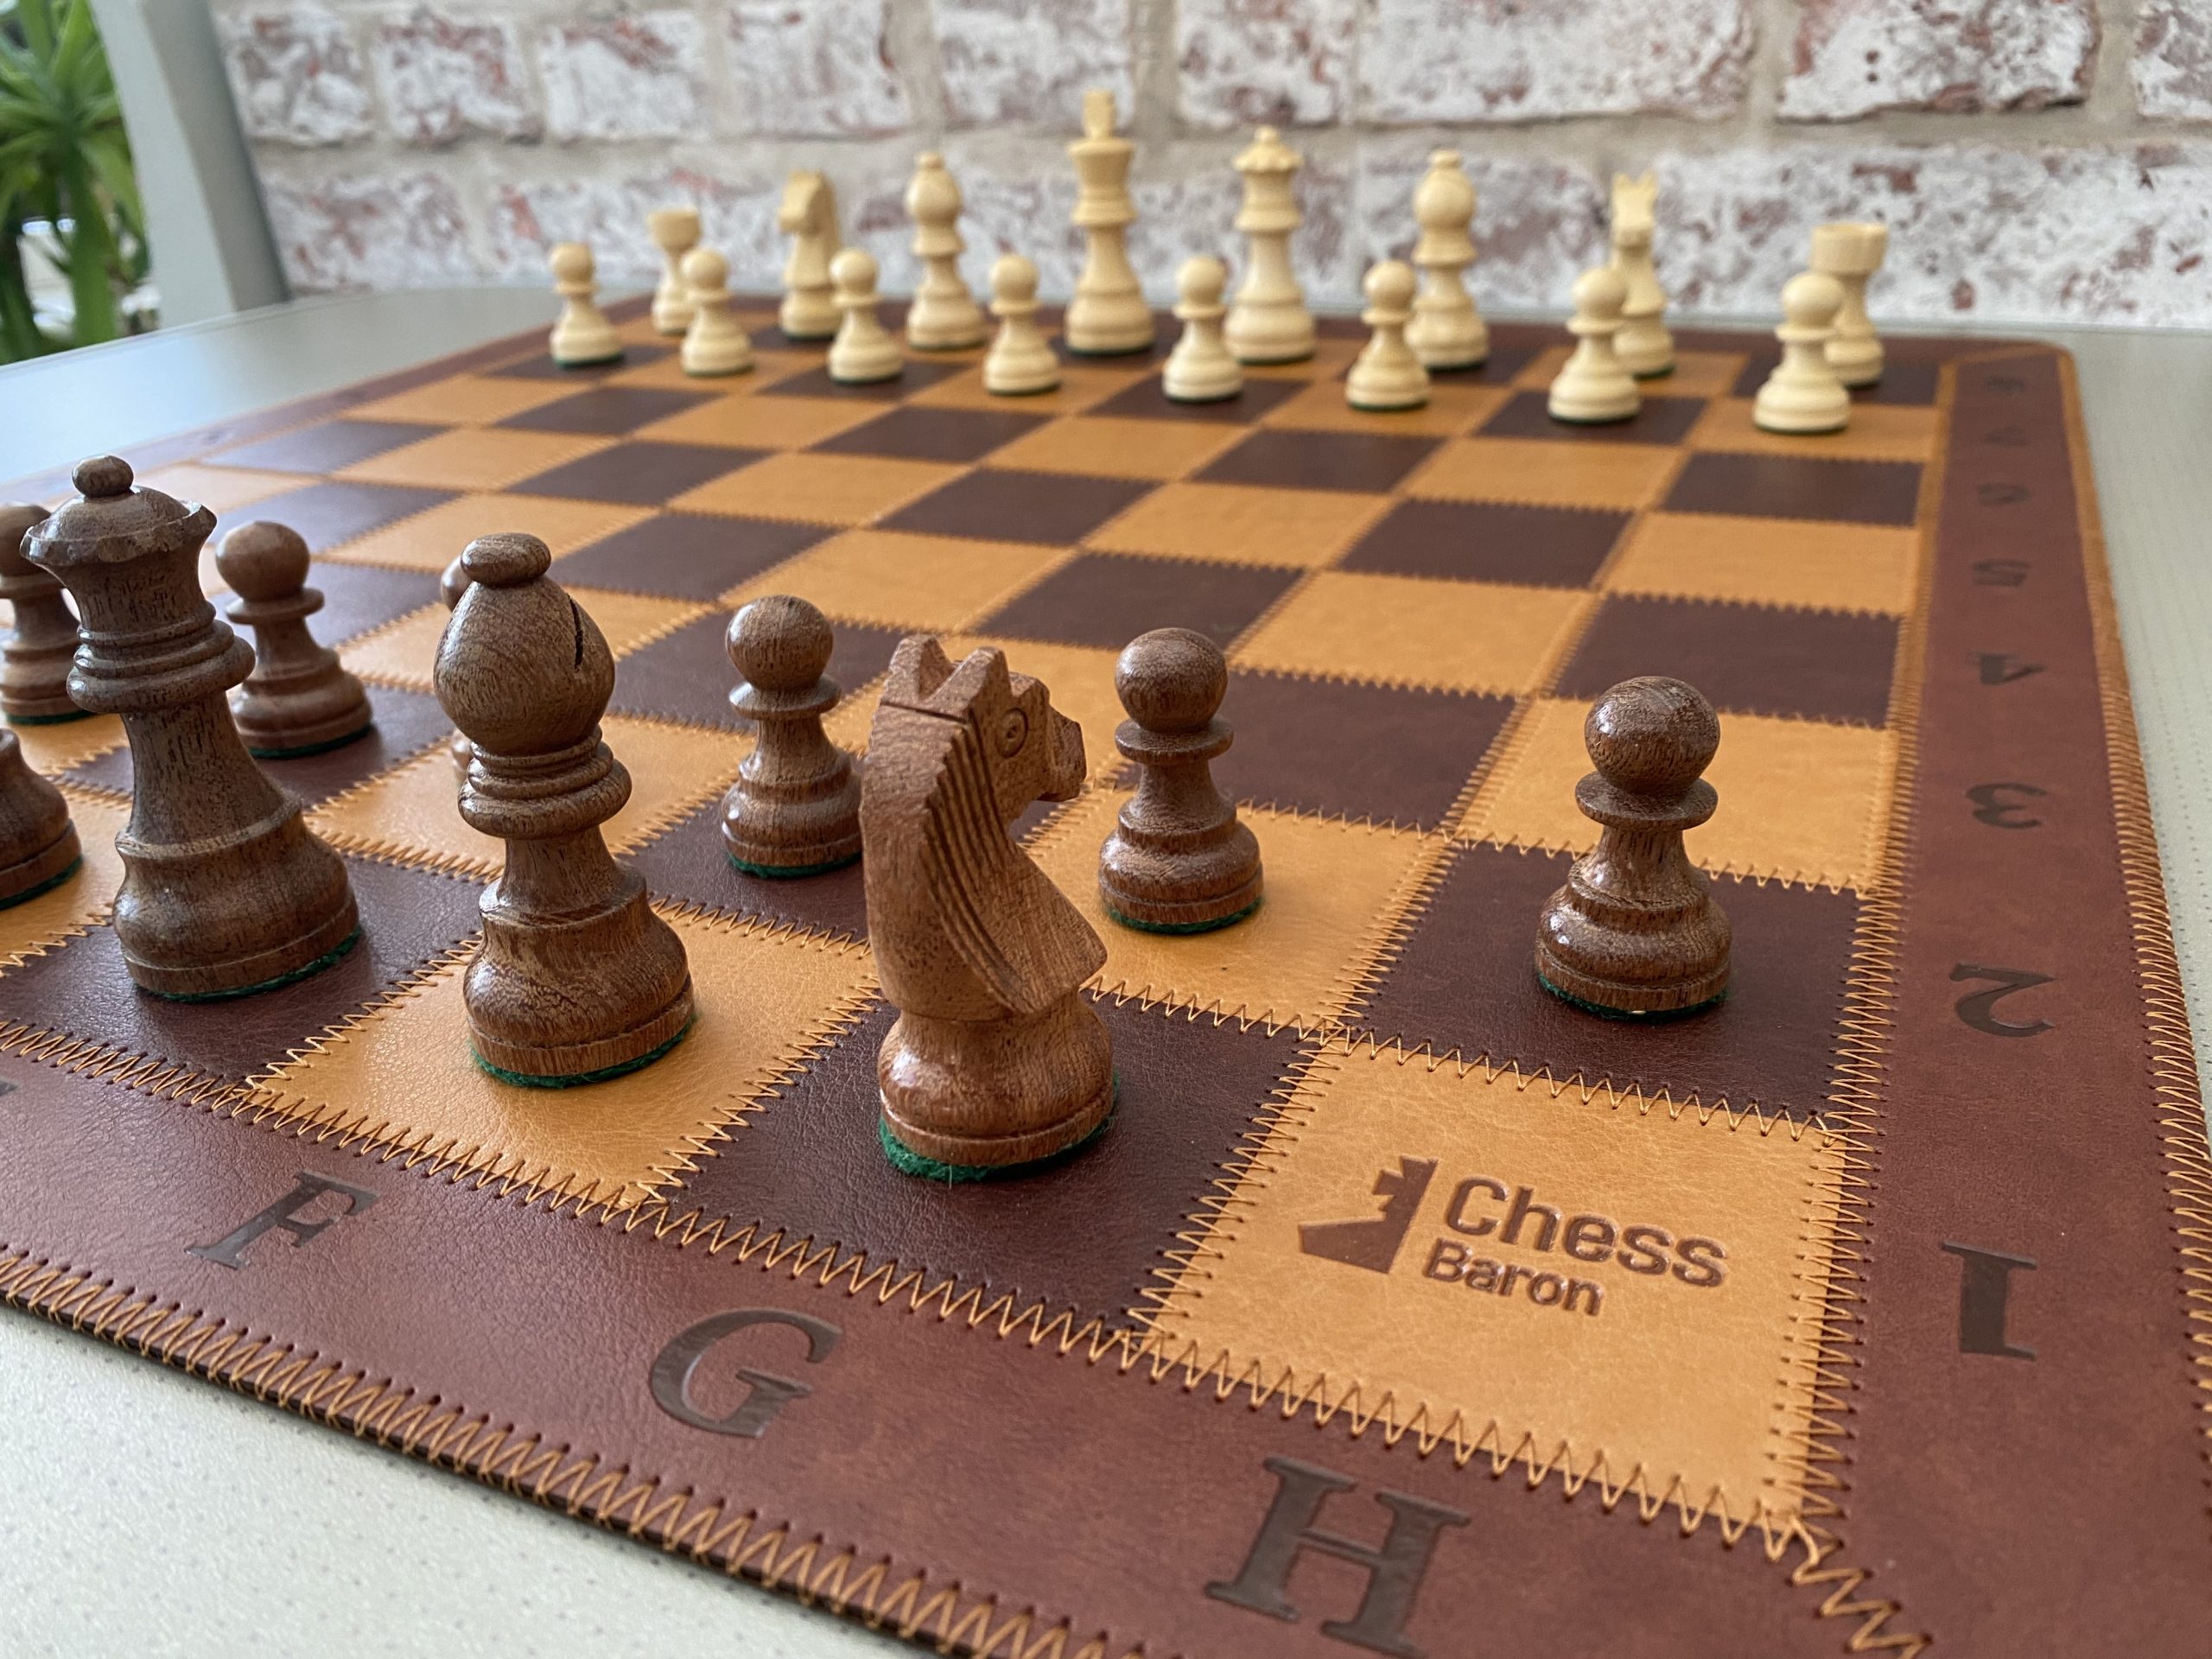 The Regency Chess Company, Canada's Finest Chess Shop